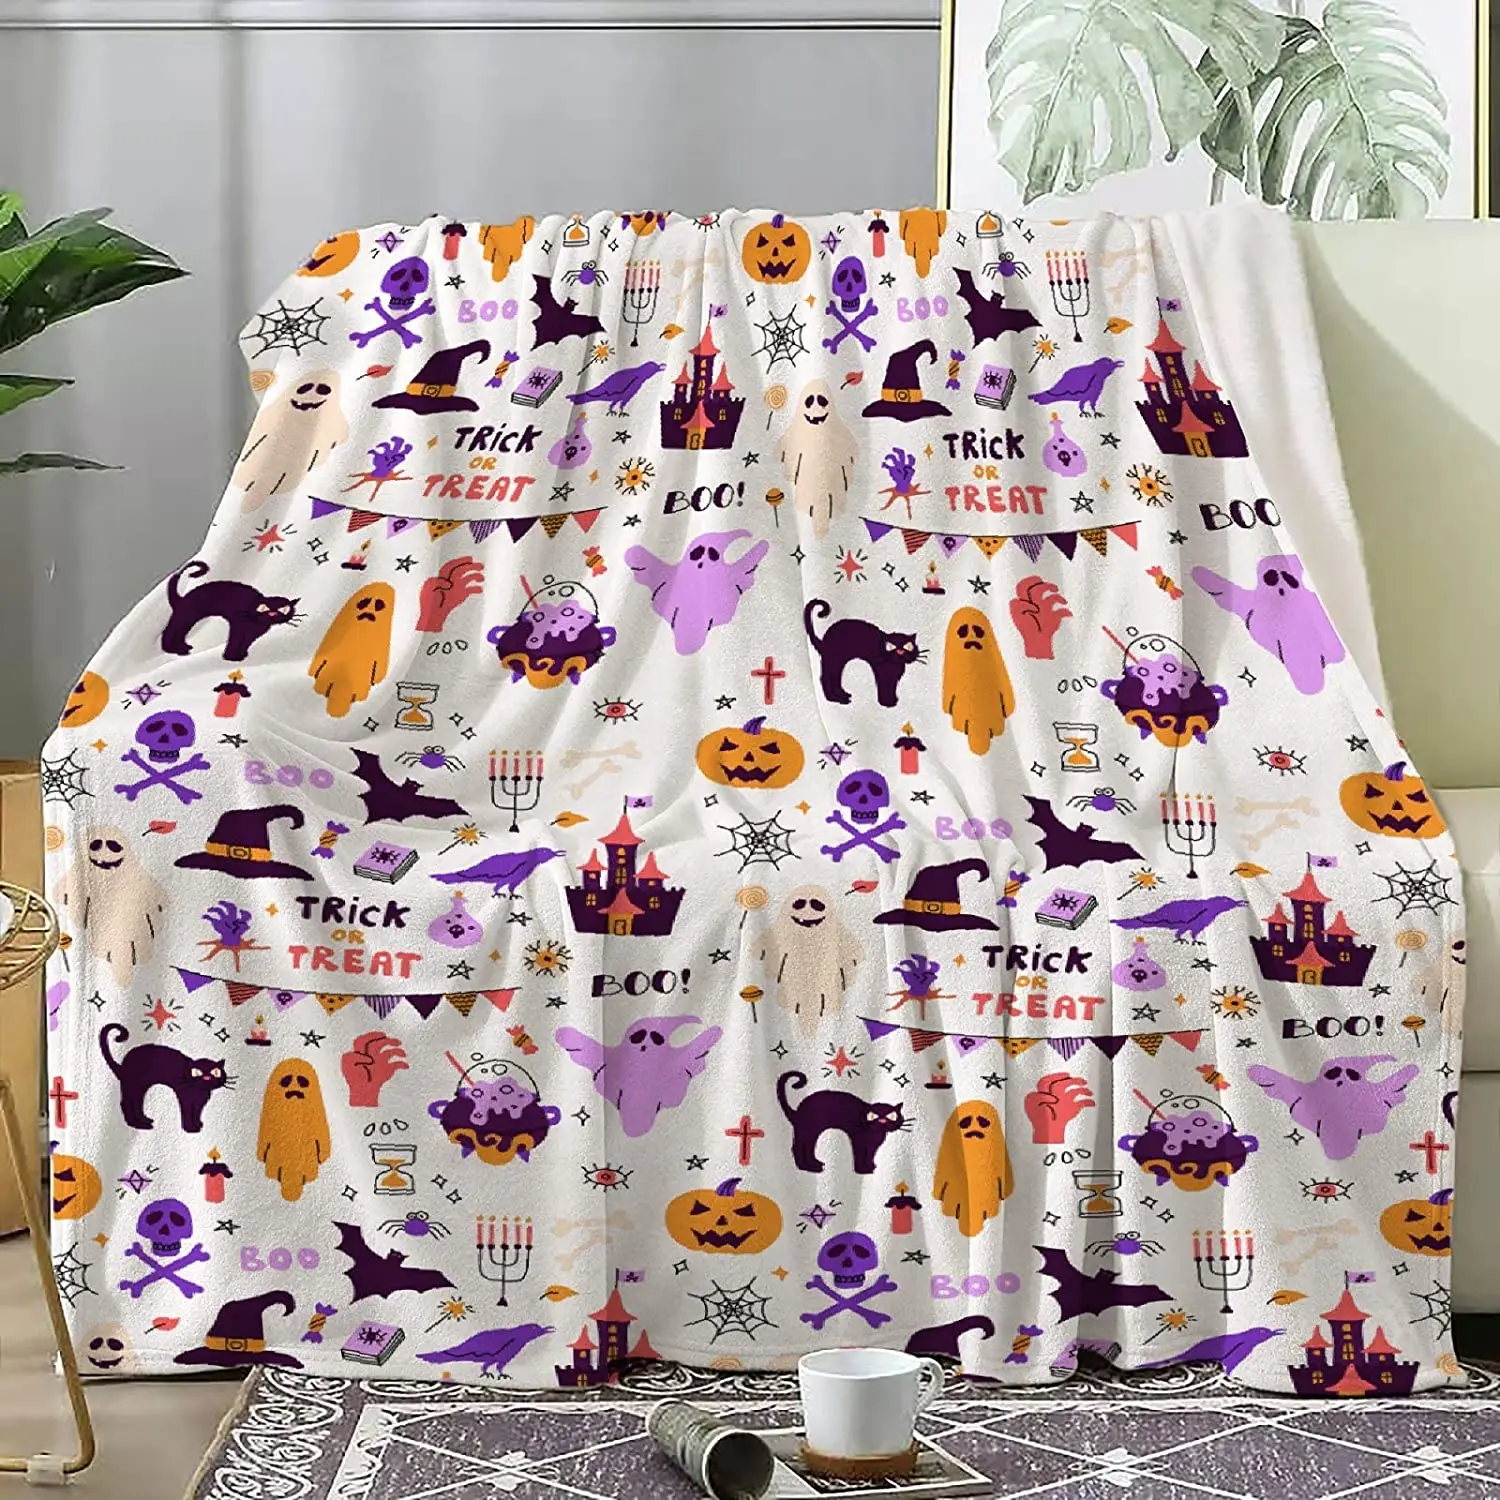 

Halloween Pumpkin Throw Flannel Blankets Used for Bed Sofa Couch for Family Cozy Warm Microfiber Halloween Decoration Blanket